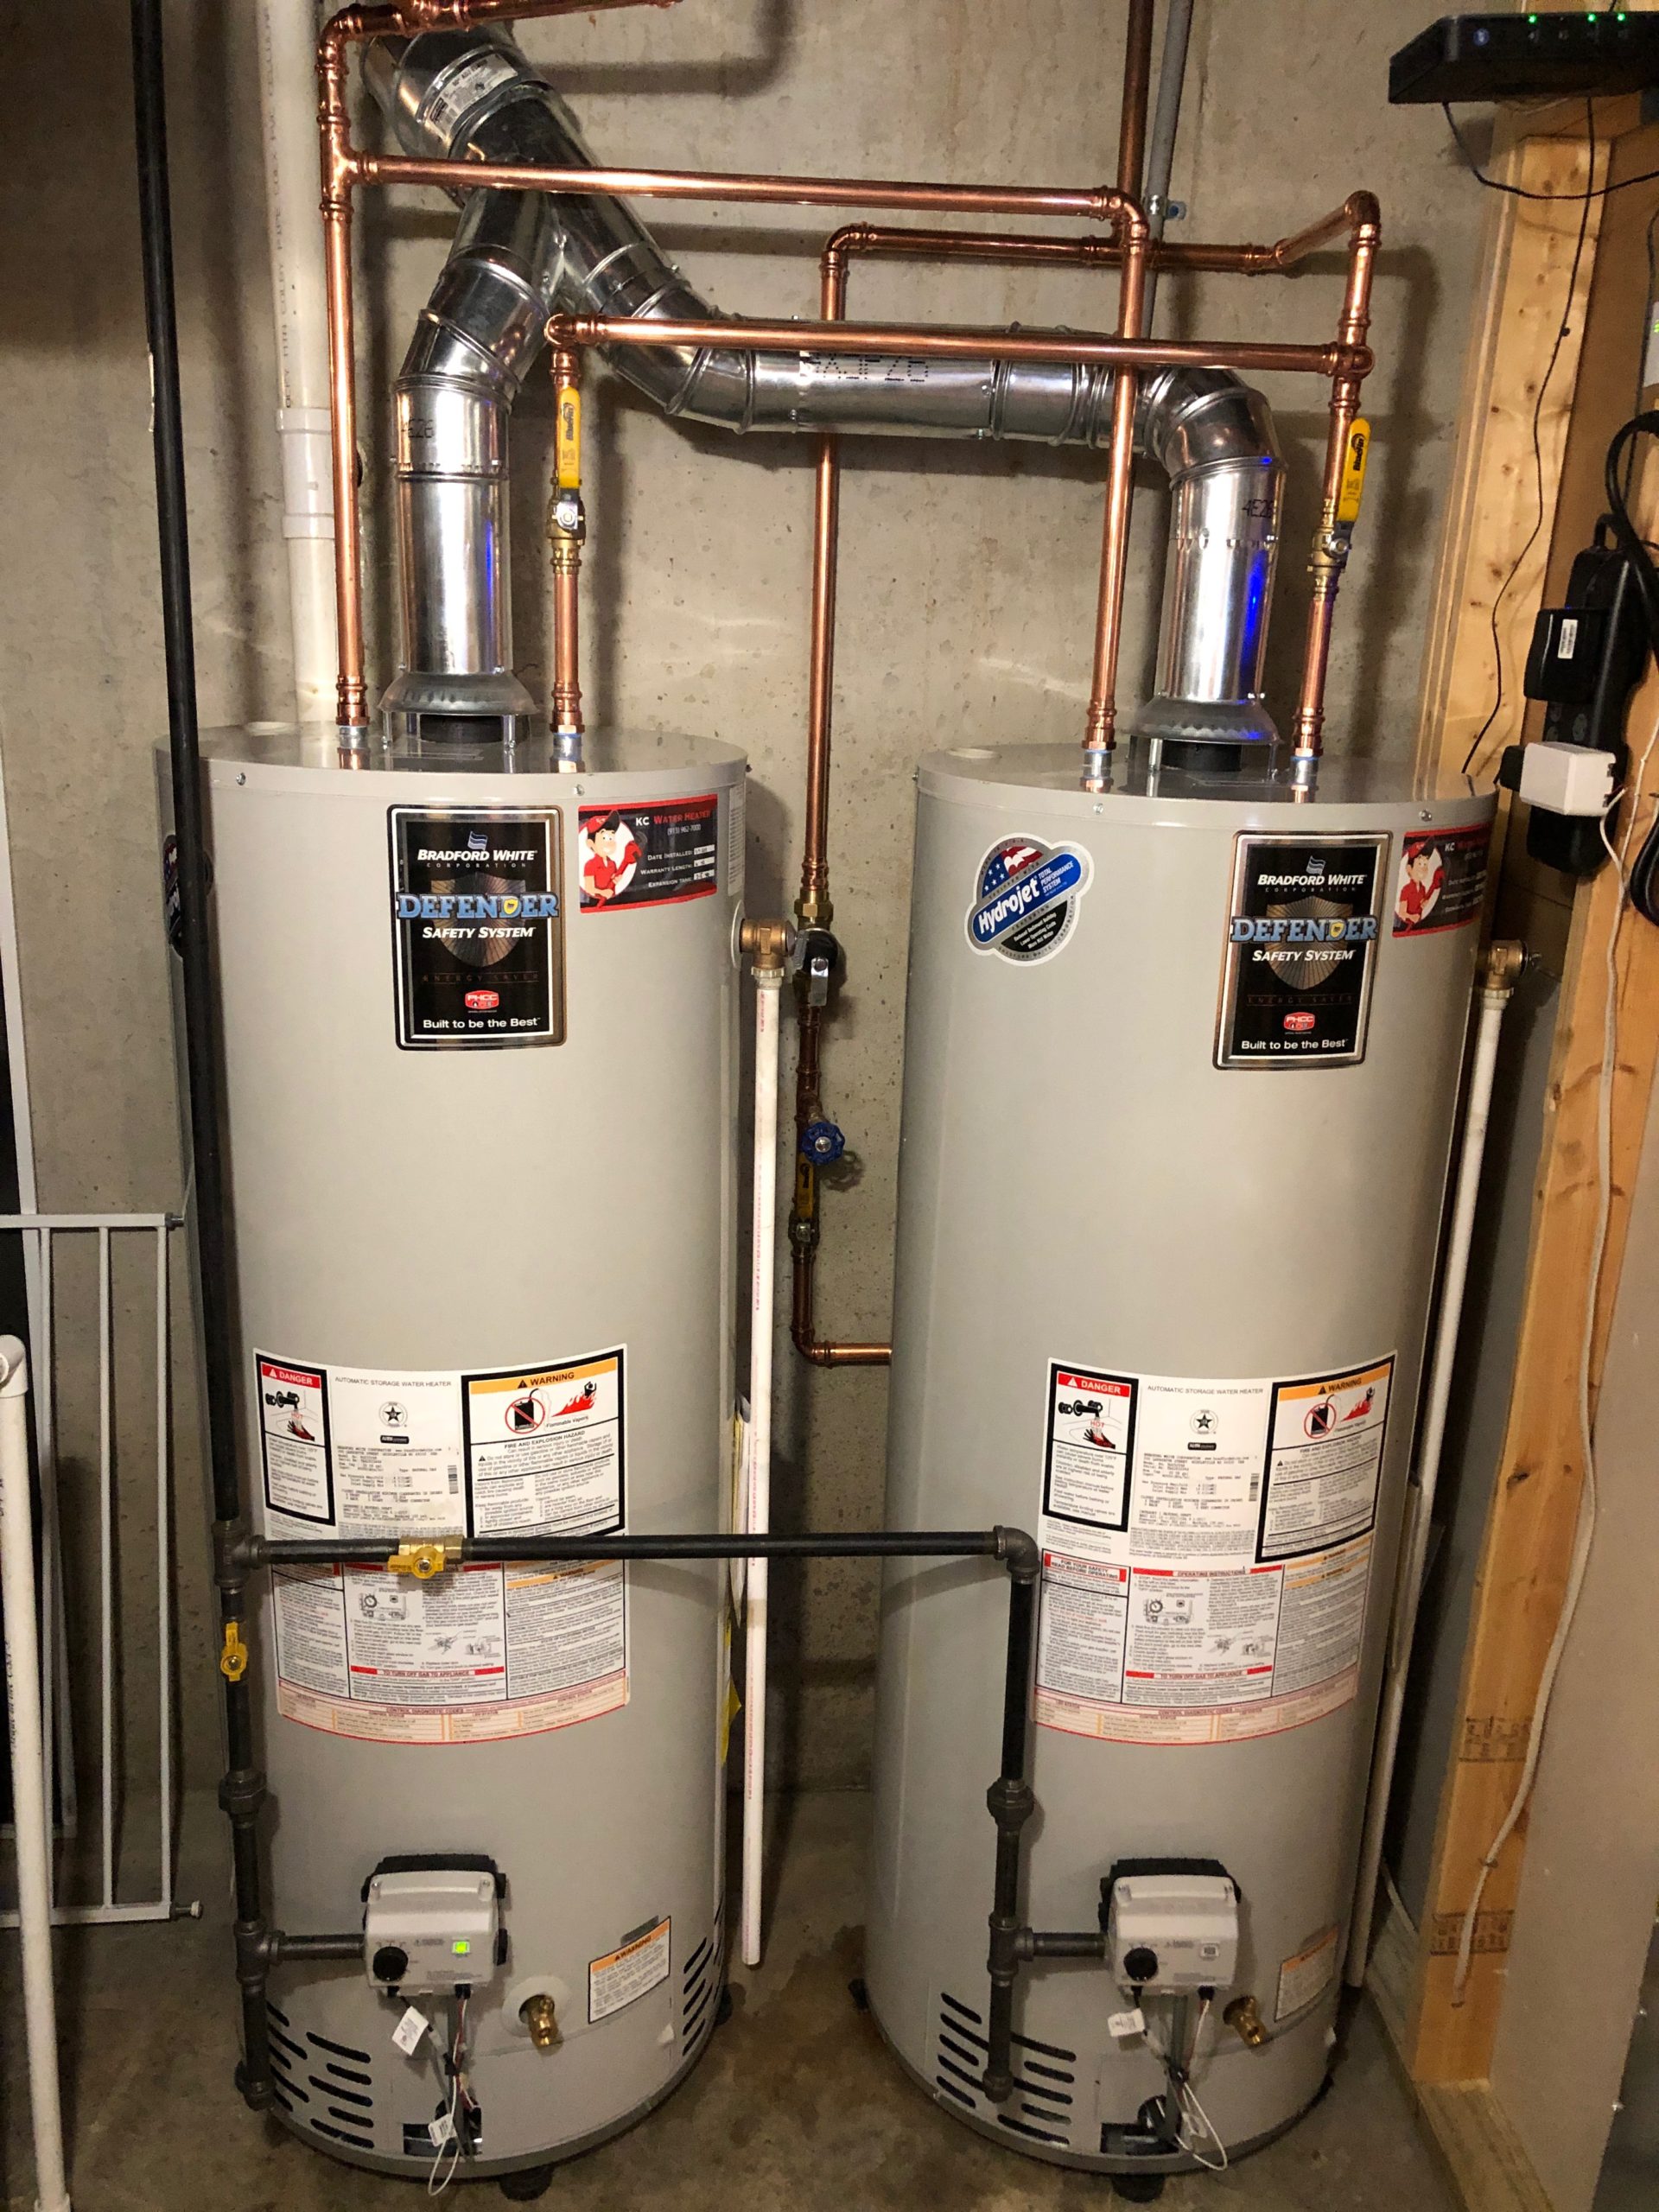 Dual water heater venting for gas tanks - Water Heaters Installed by